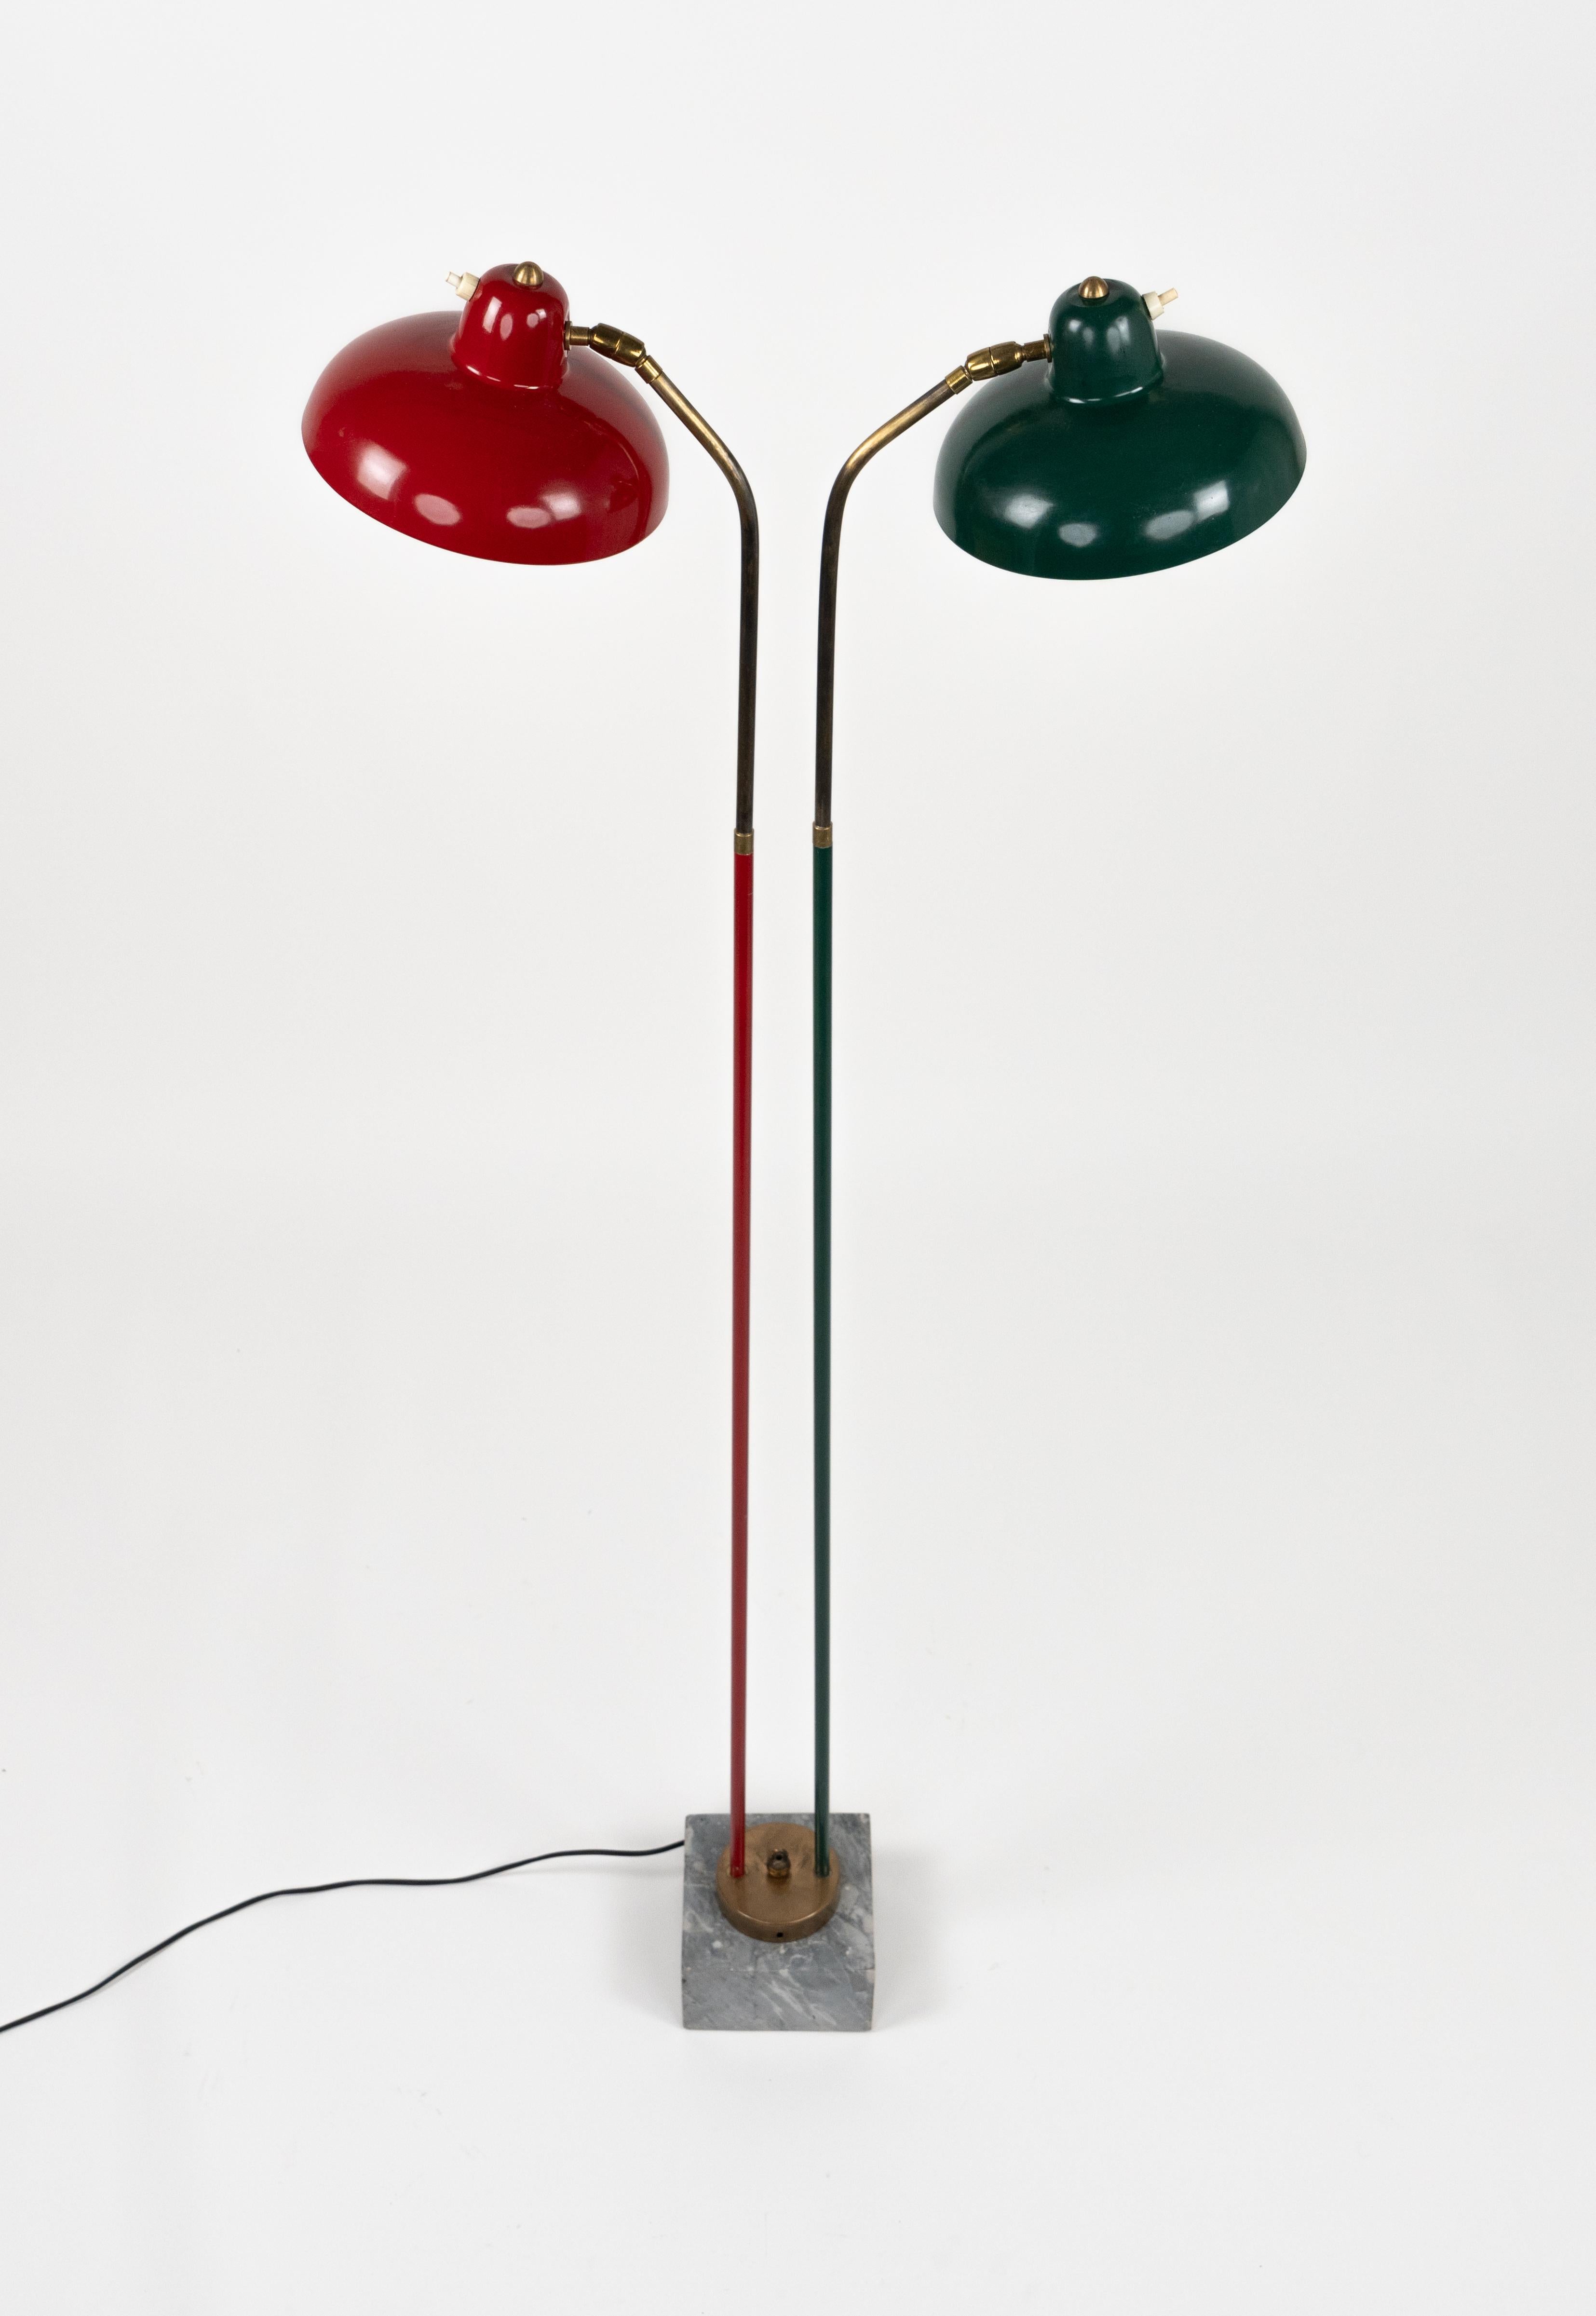 Mid-Century Modern Floor Lamp in Marble, Lacquered Metal and Brass Stilnovo Style, Italy 1950s For Sale